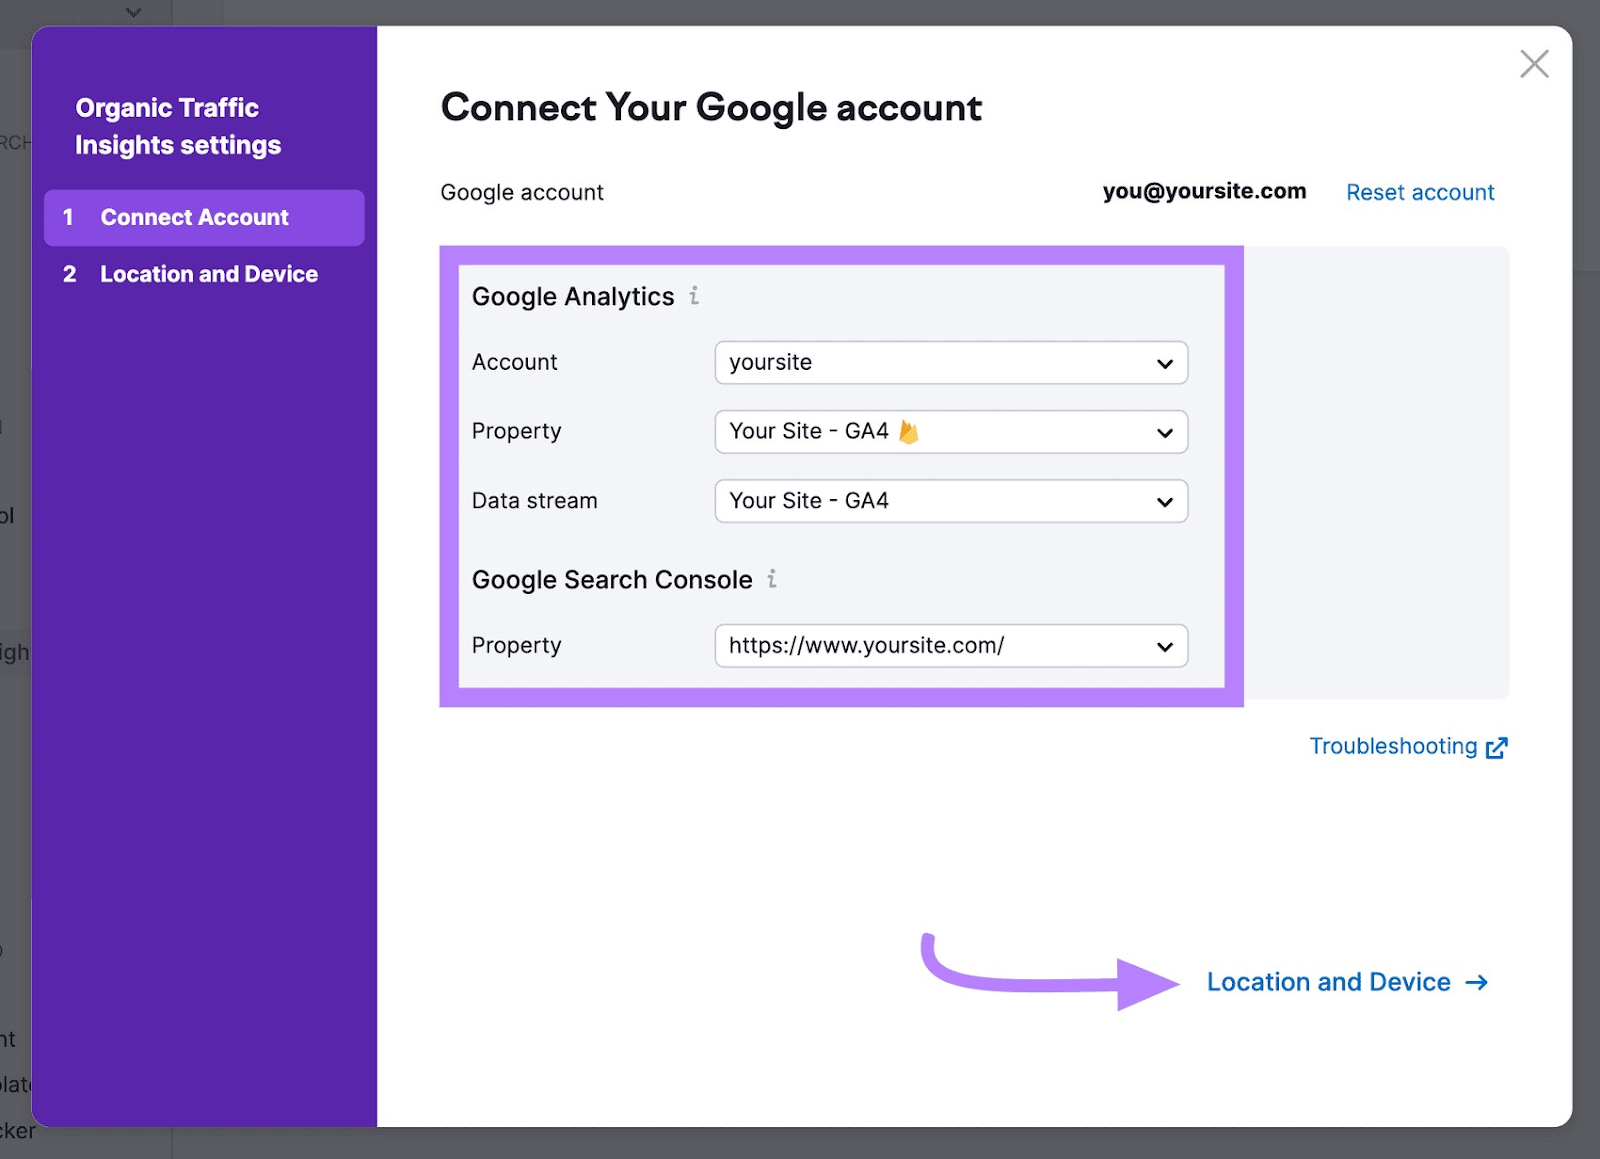 Adding accounts, properties, and data streams under "Google Analytics" section